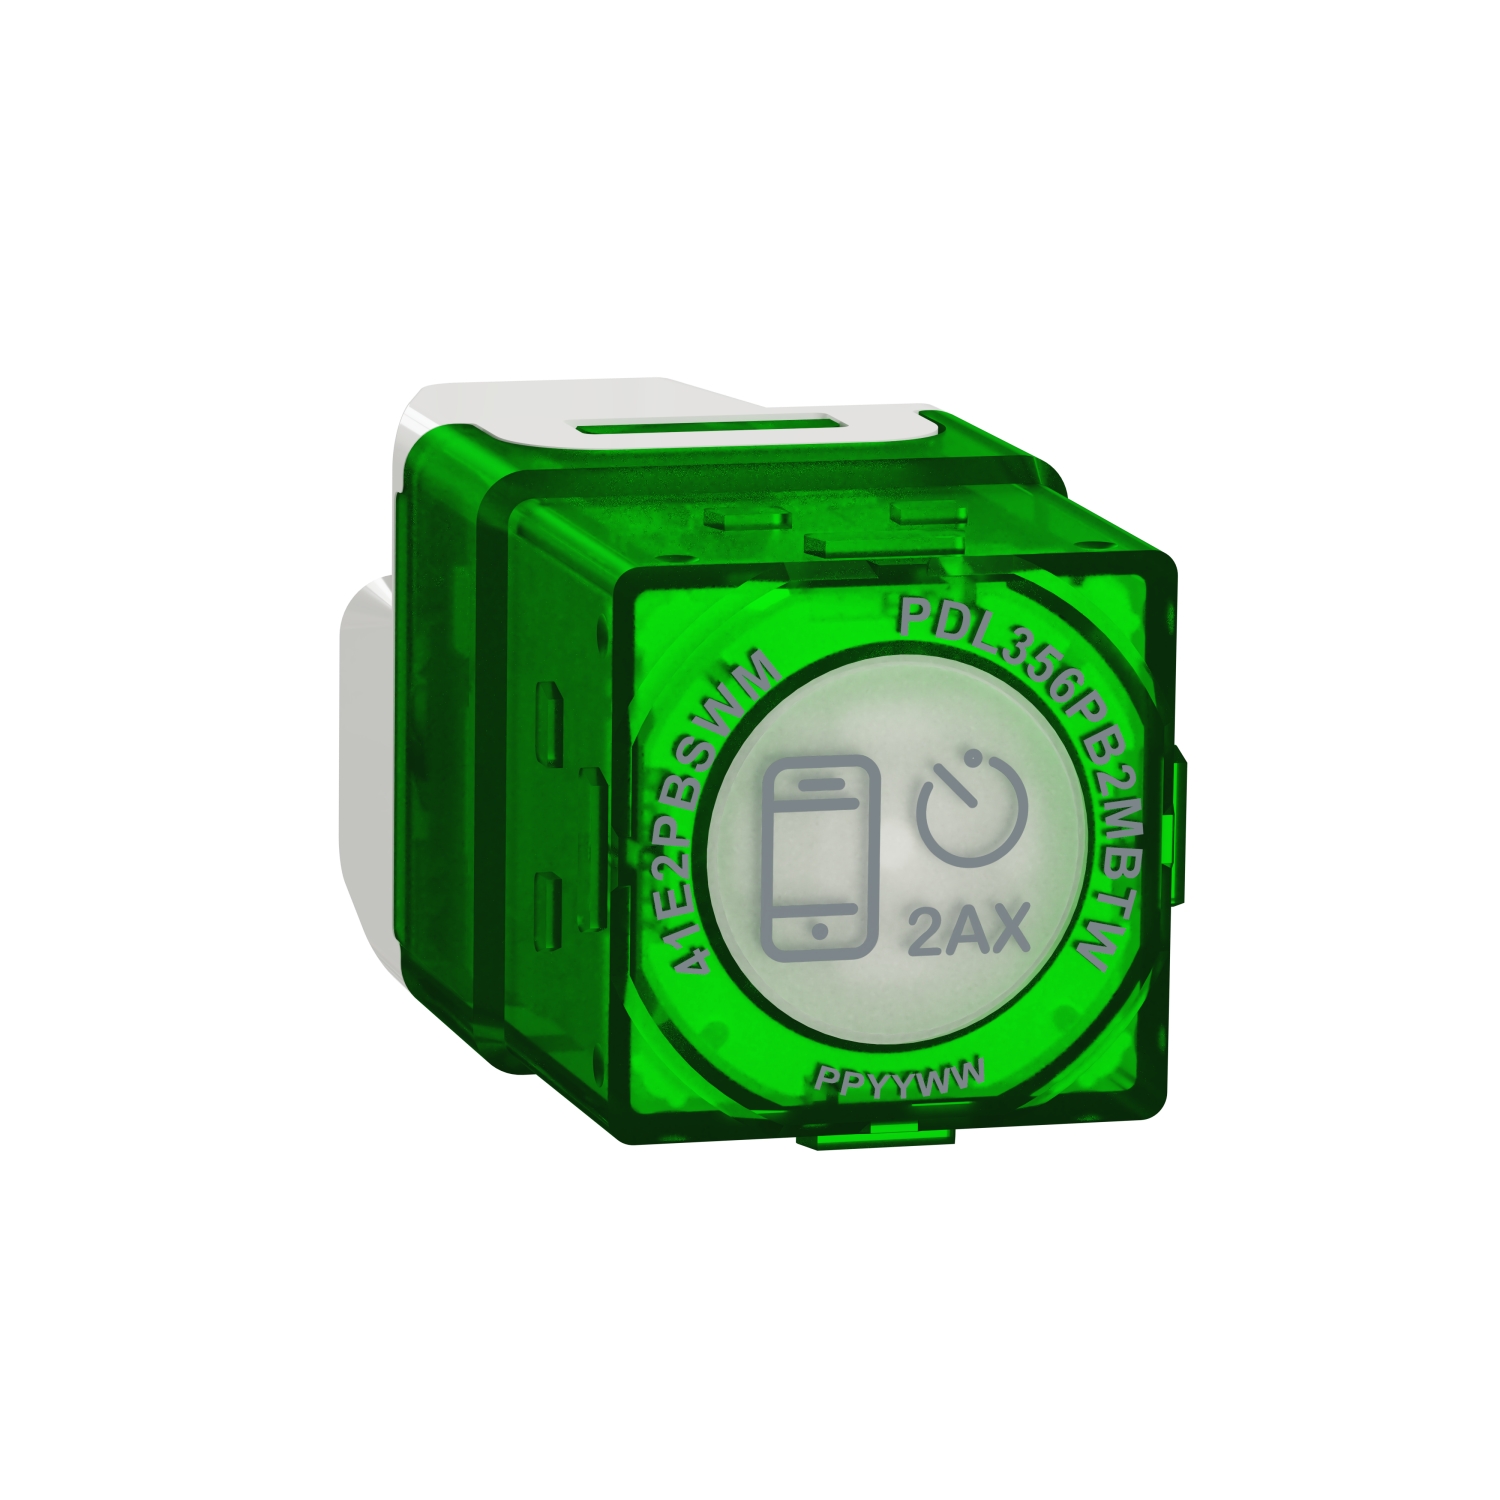 PDL Iconic Push-Button Bluetooth Connected Switch Module 240V 2AX